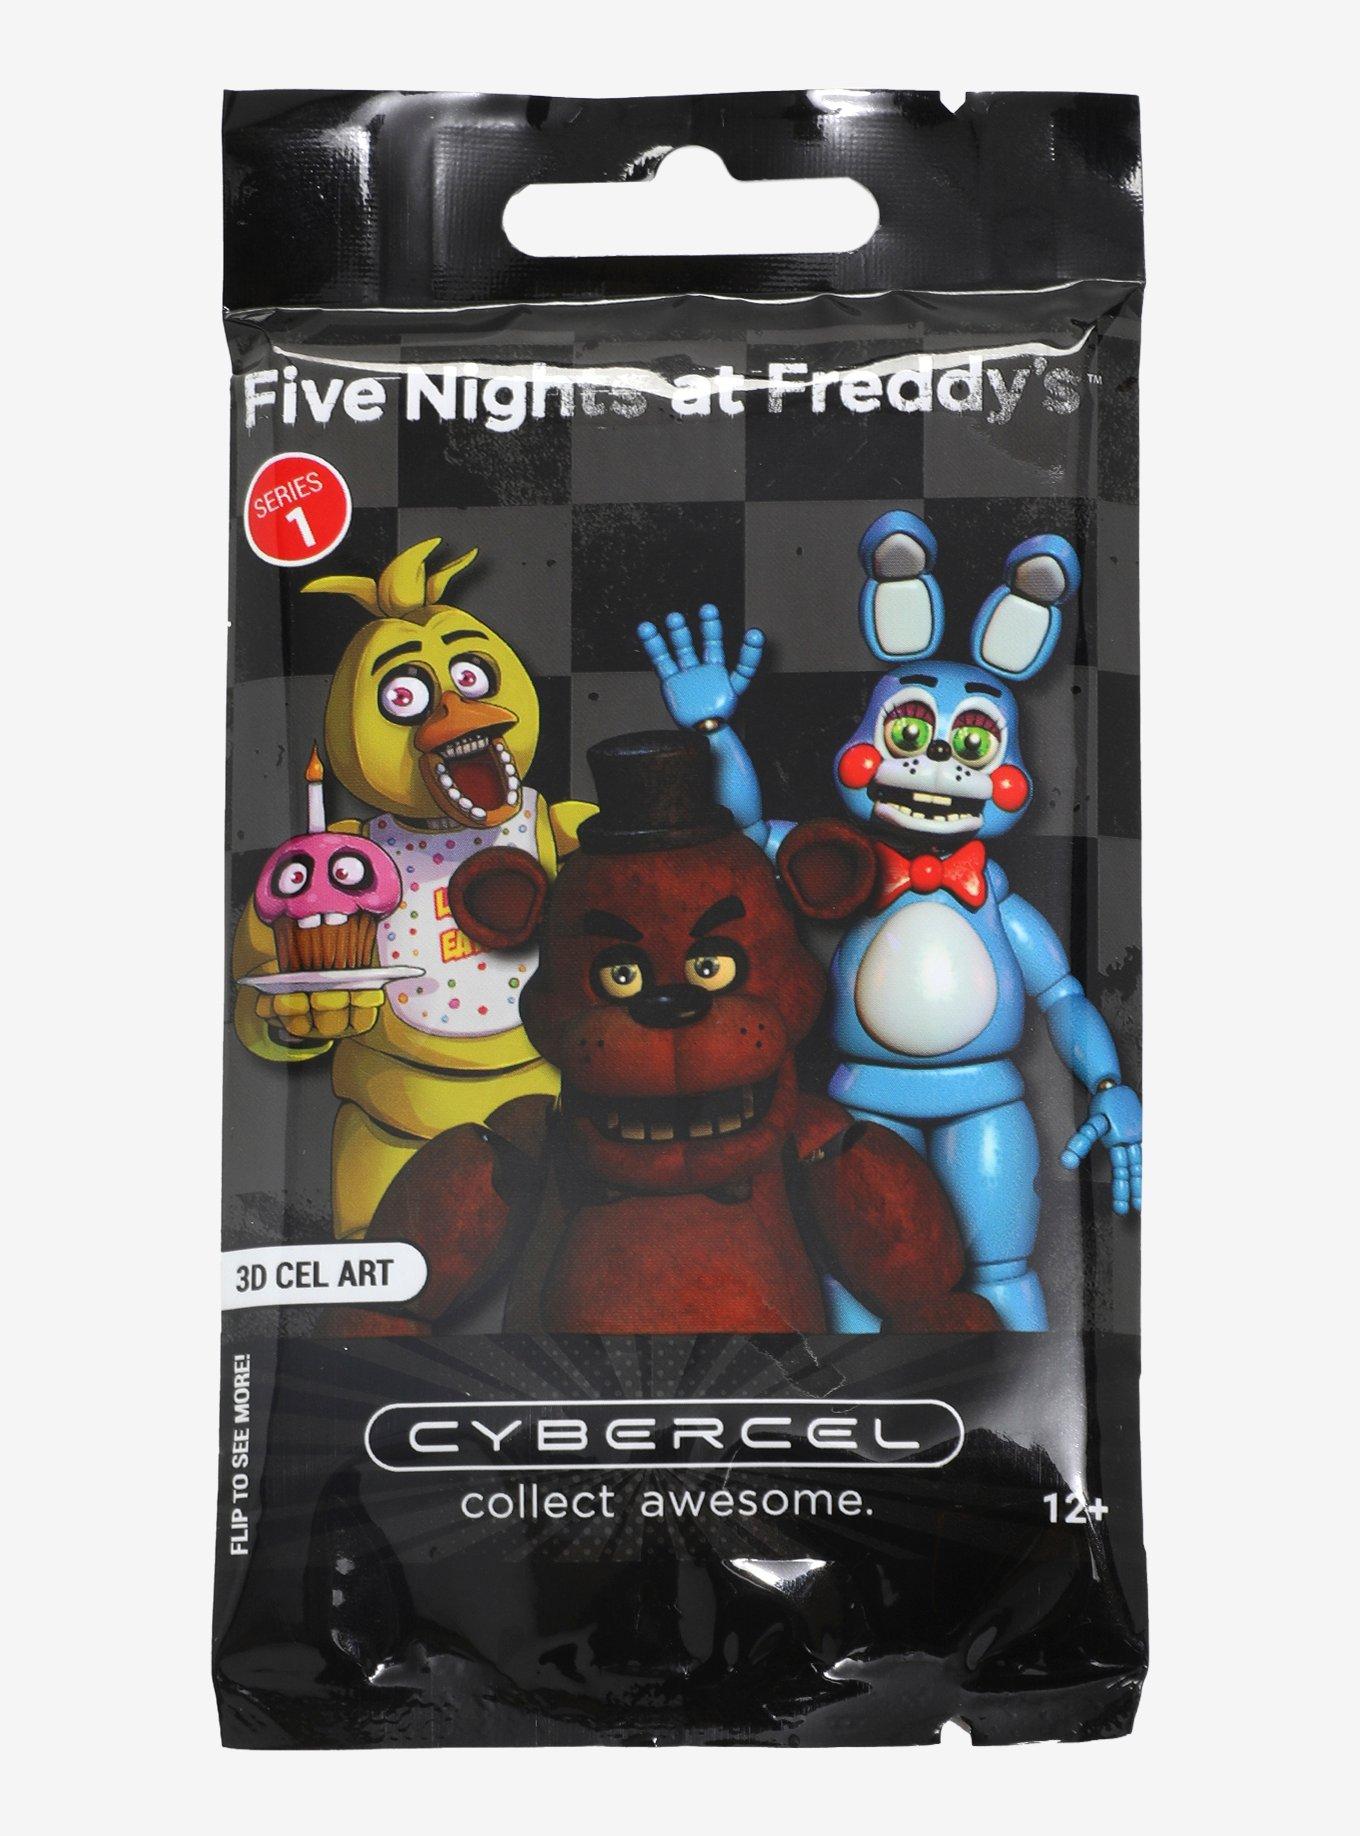 Five Nights At Freddy's Collection PC Download (1-5 Pack)